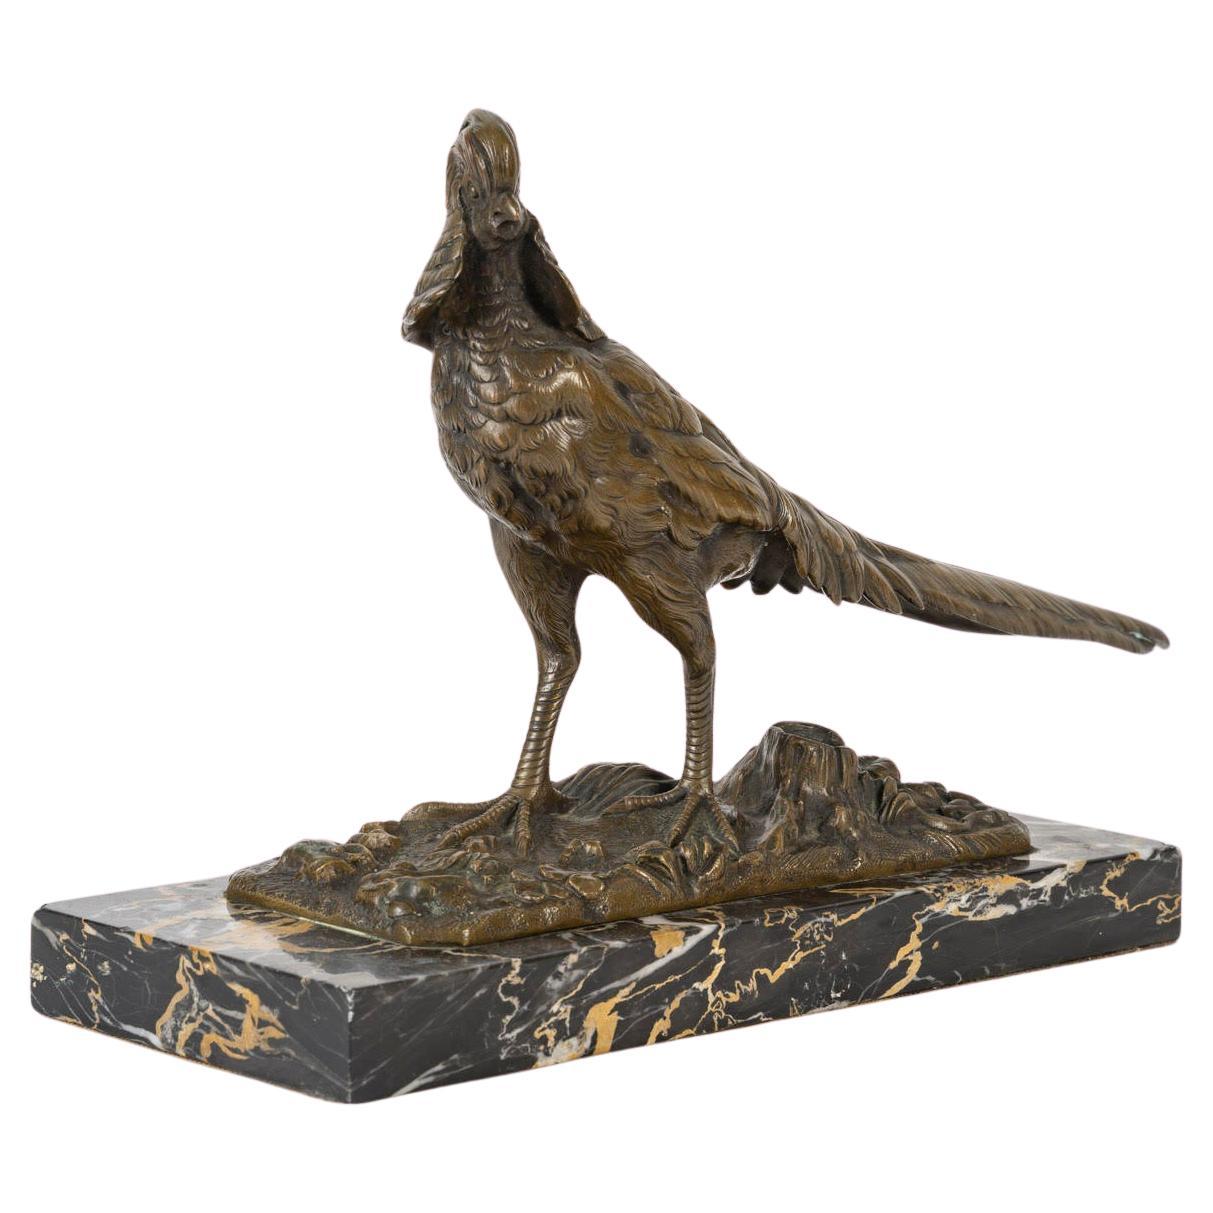 Sculpture in Patinated Bronze, Animal Statue Representing a Pheasant, 1920-1930.